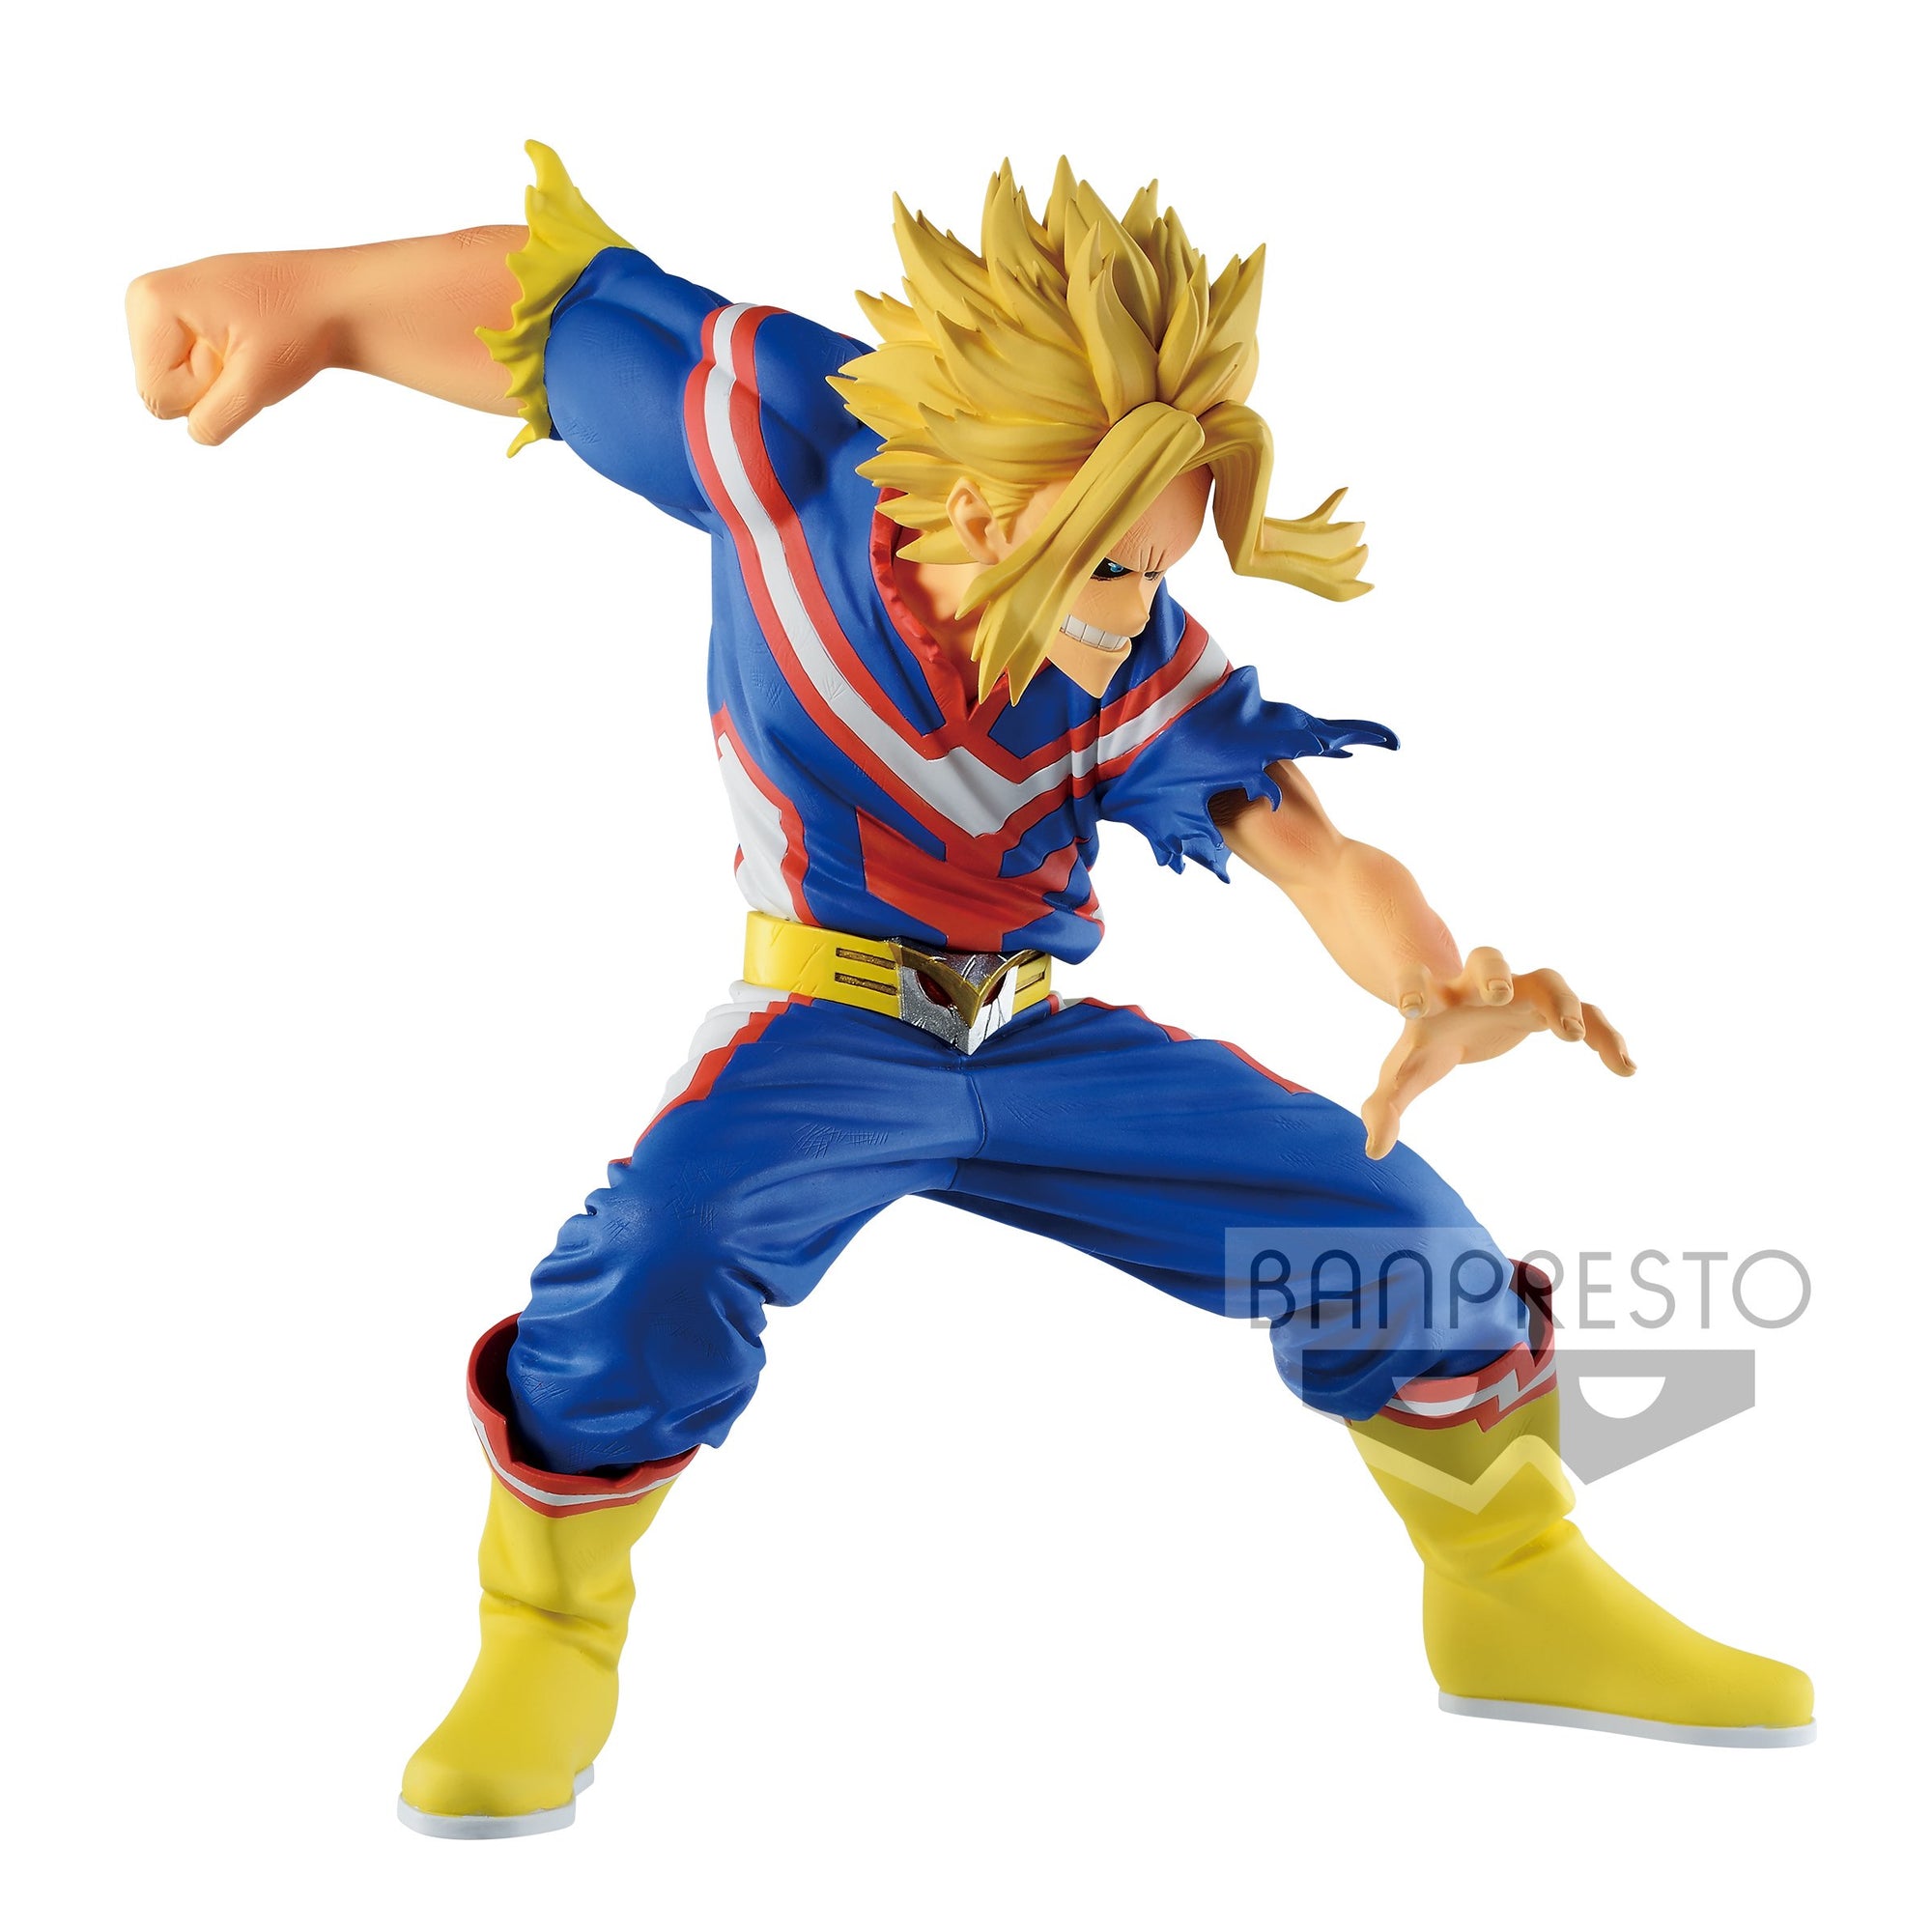 That's why I'm fighting! To be a gentle king!!! S.H.Figuarts ZATCH BELL &  Kiyomaro Takamine Product Samples!